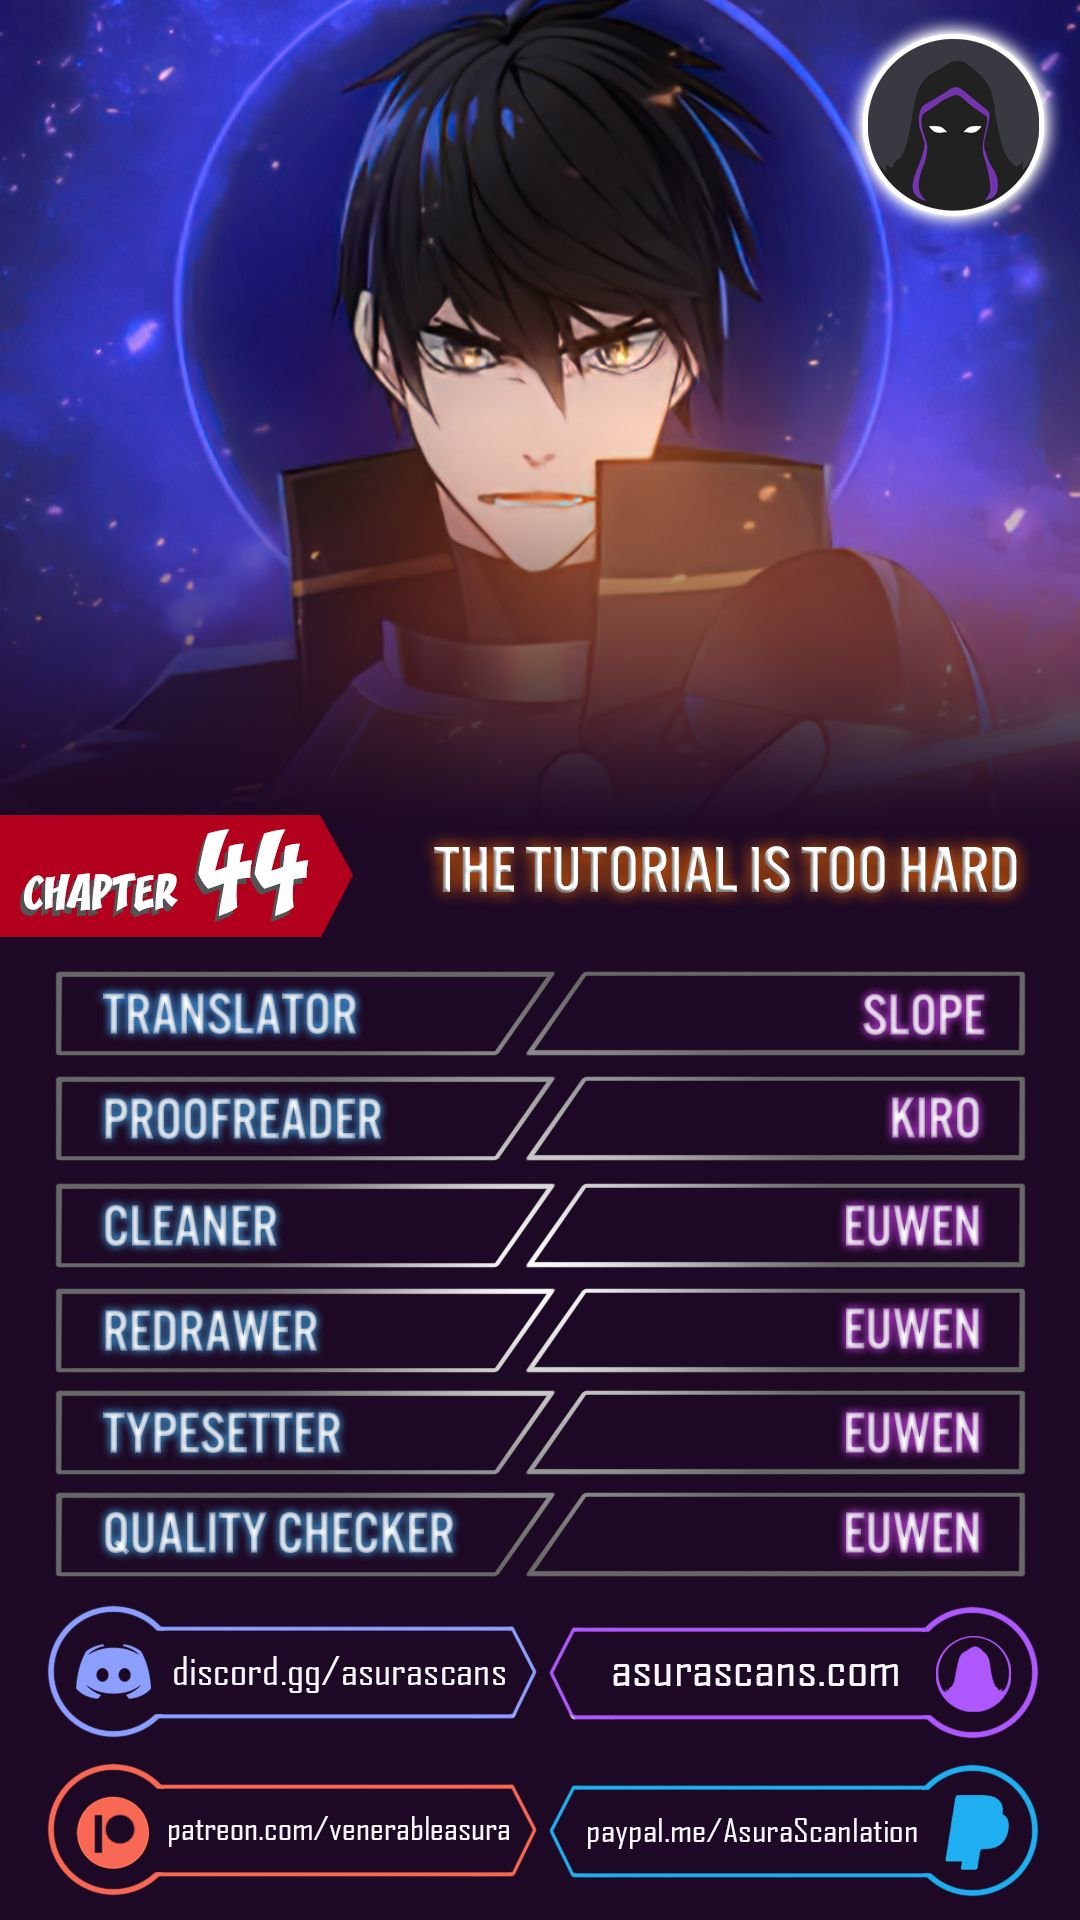 The Tutorial is Too Hard chapter 44